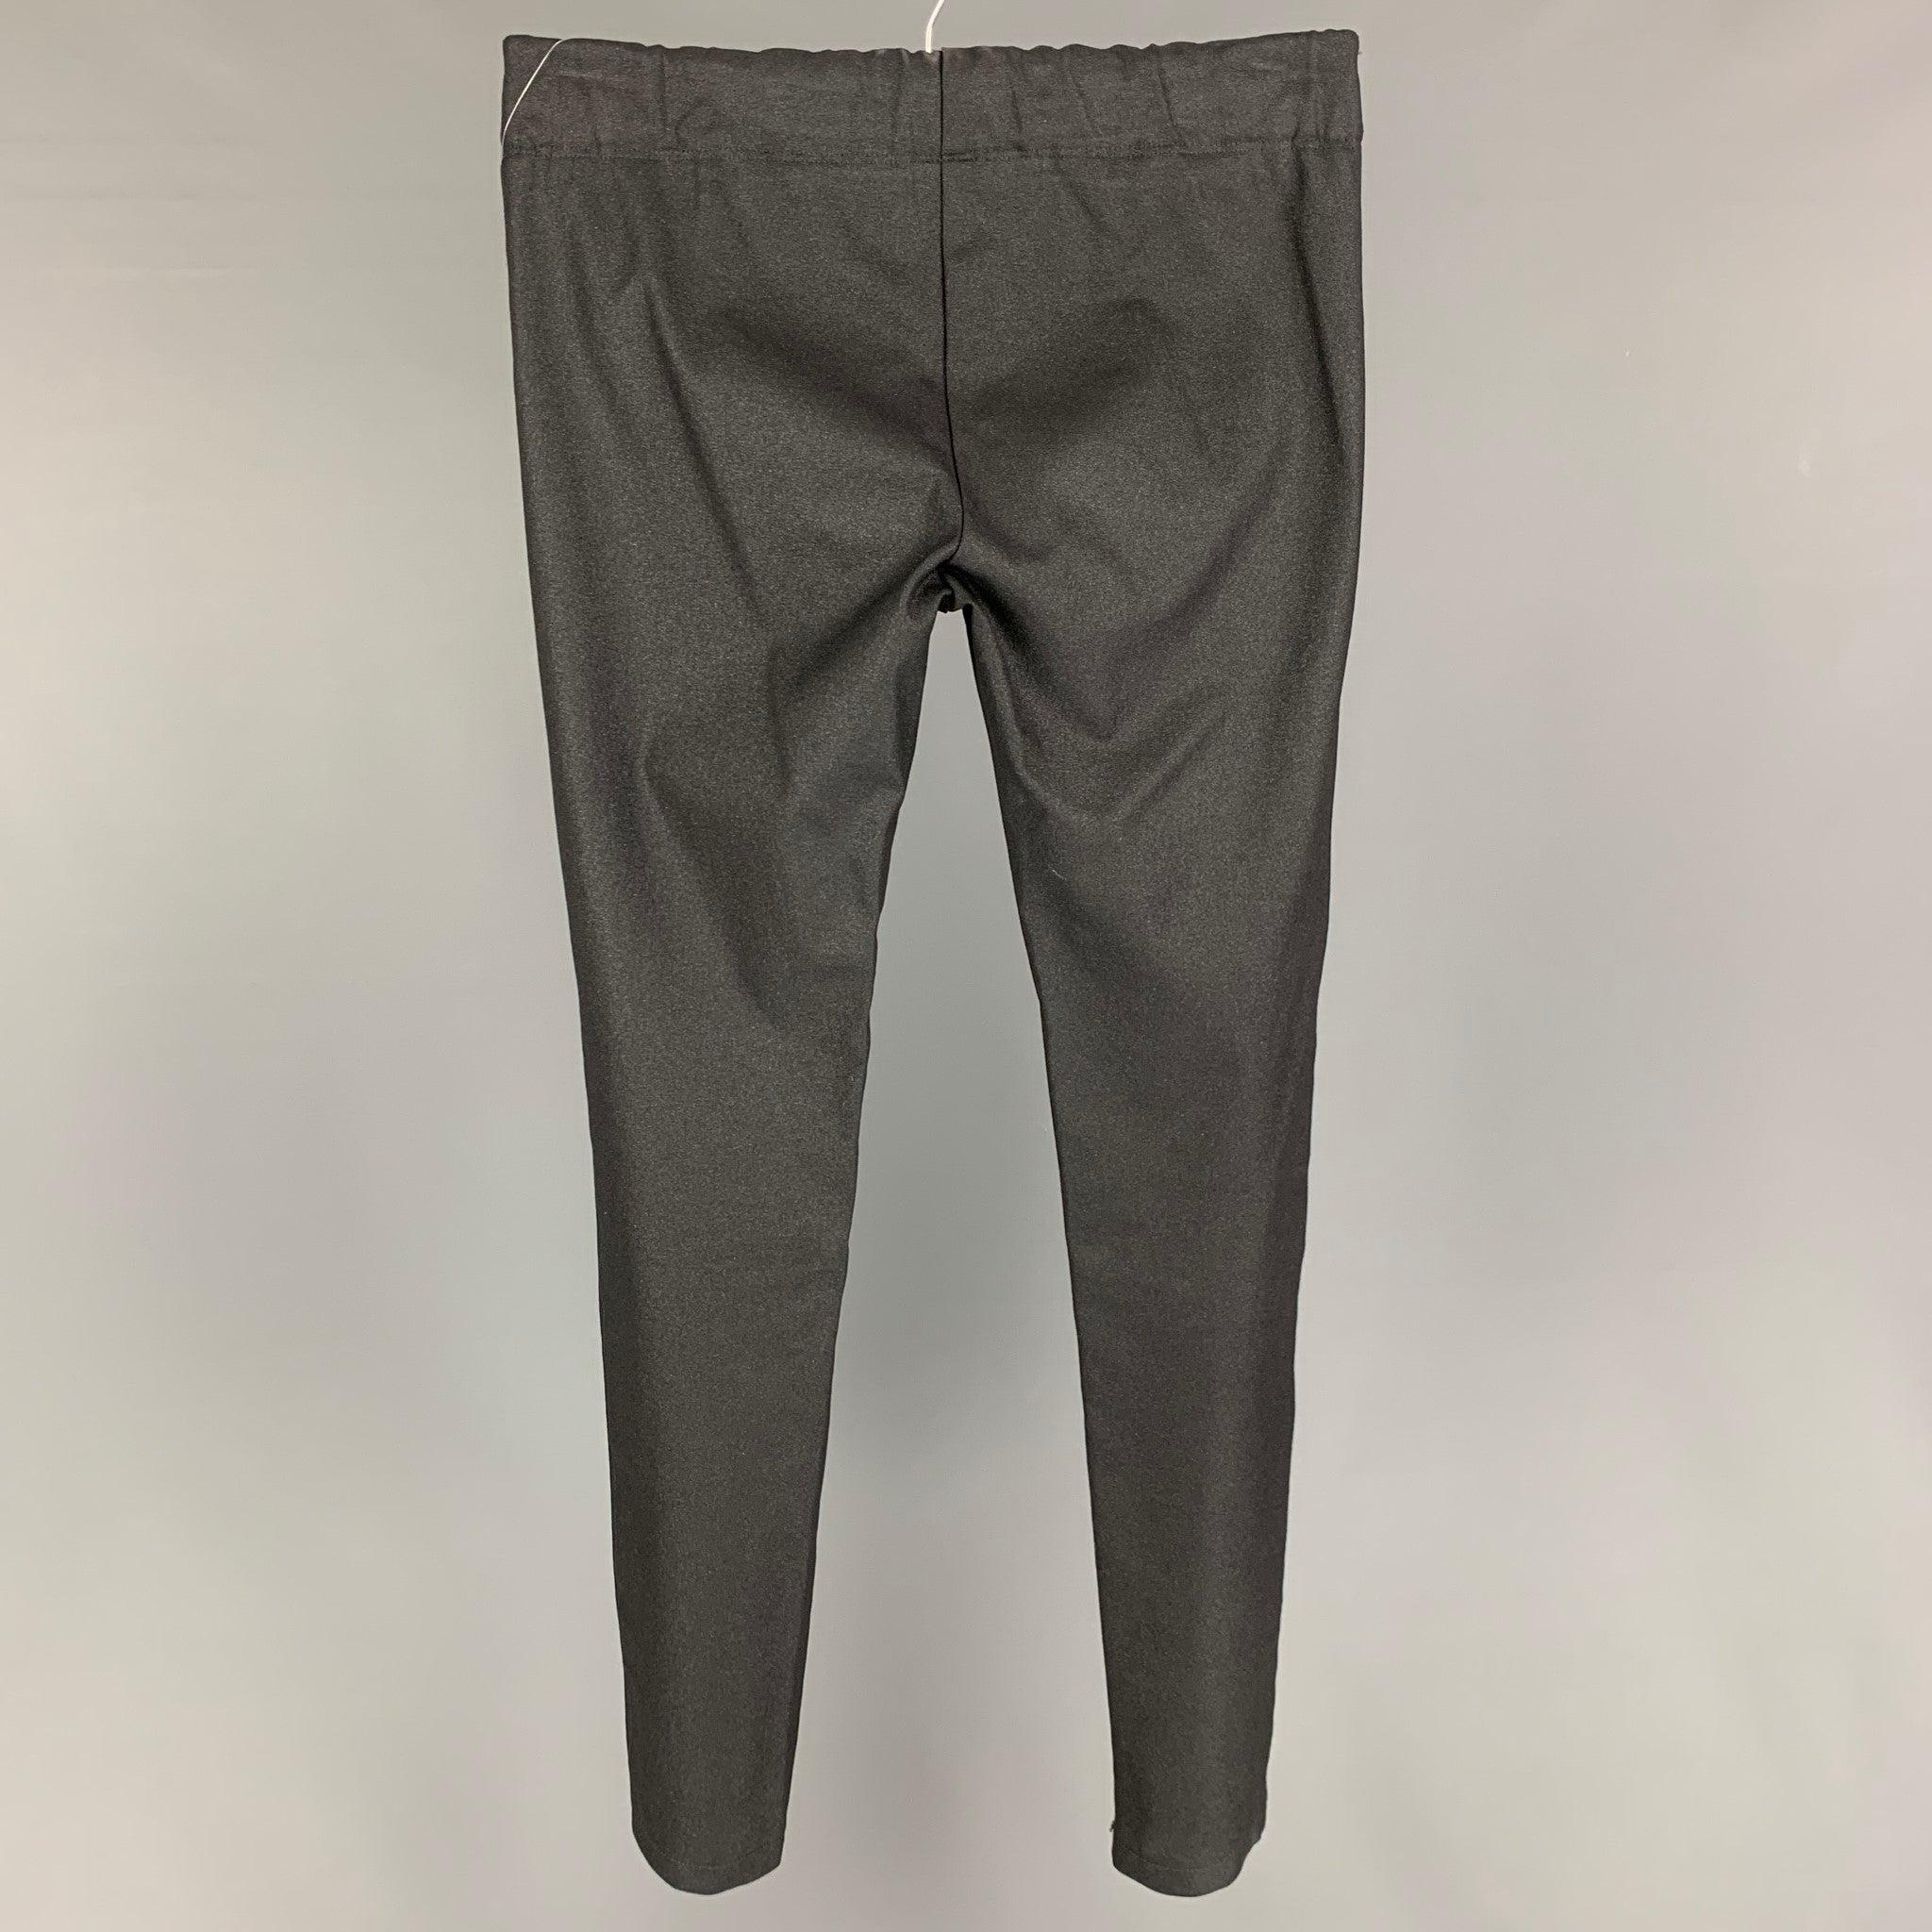 JOSEPH leggings comes in a charcoal sparkly viscose blend featuring a elastic waistband. Made in France.
Very Good
Pre-Owned Condition. 

Marked:   36 

Measurements: 
  Waist: 26 inches  Rise: 8.5 inches  Inseam: 29 inches 
  
  
 
Reference: